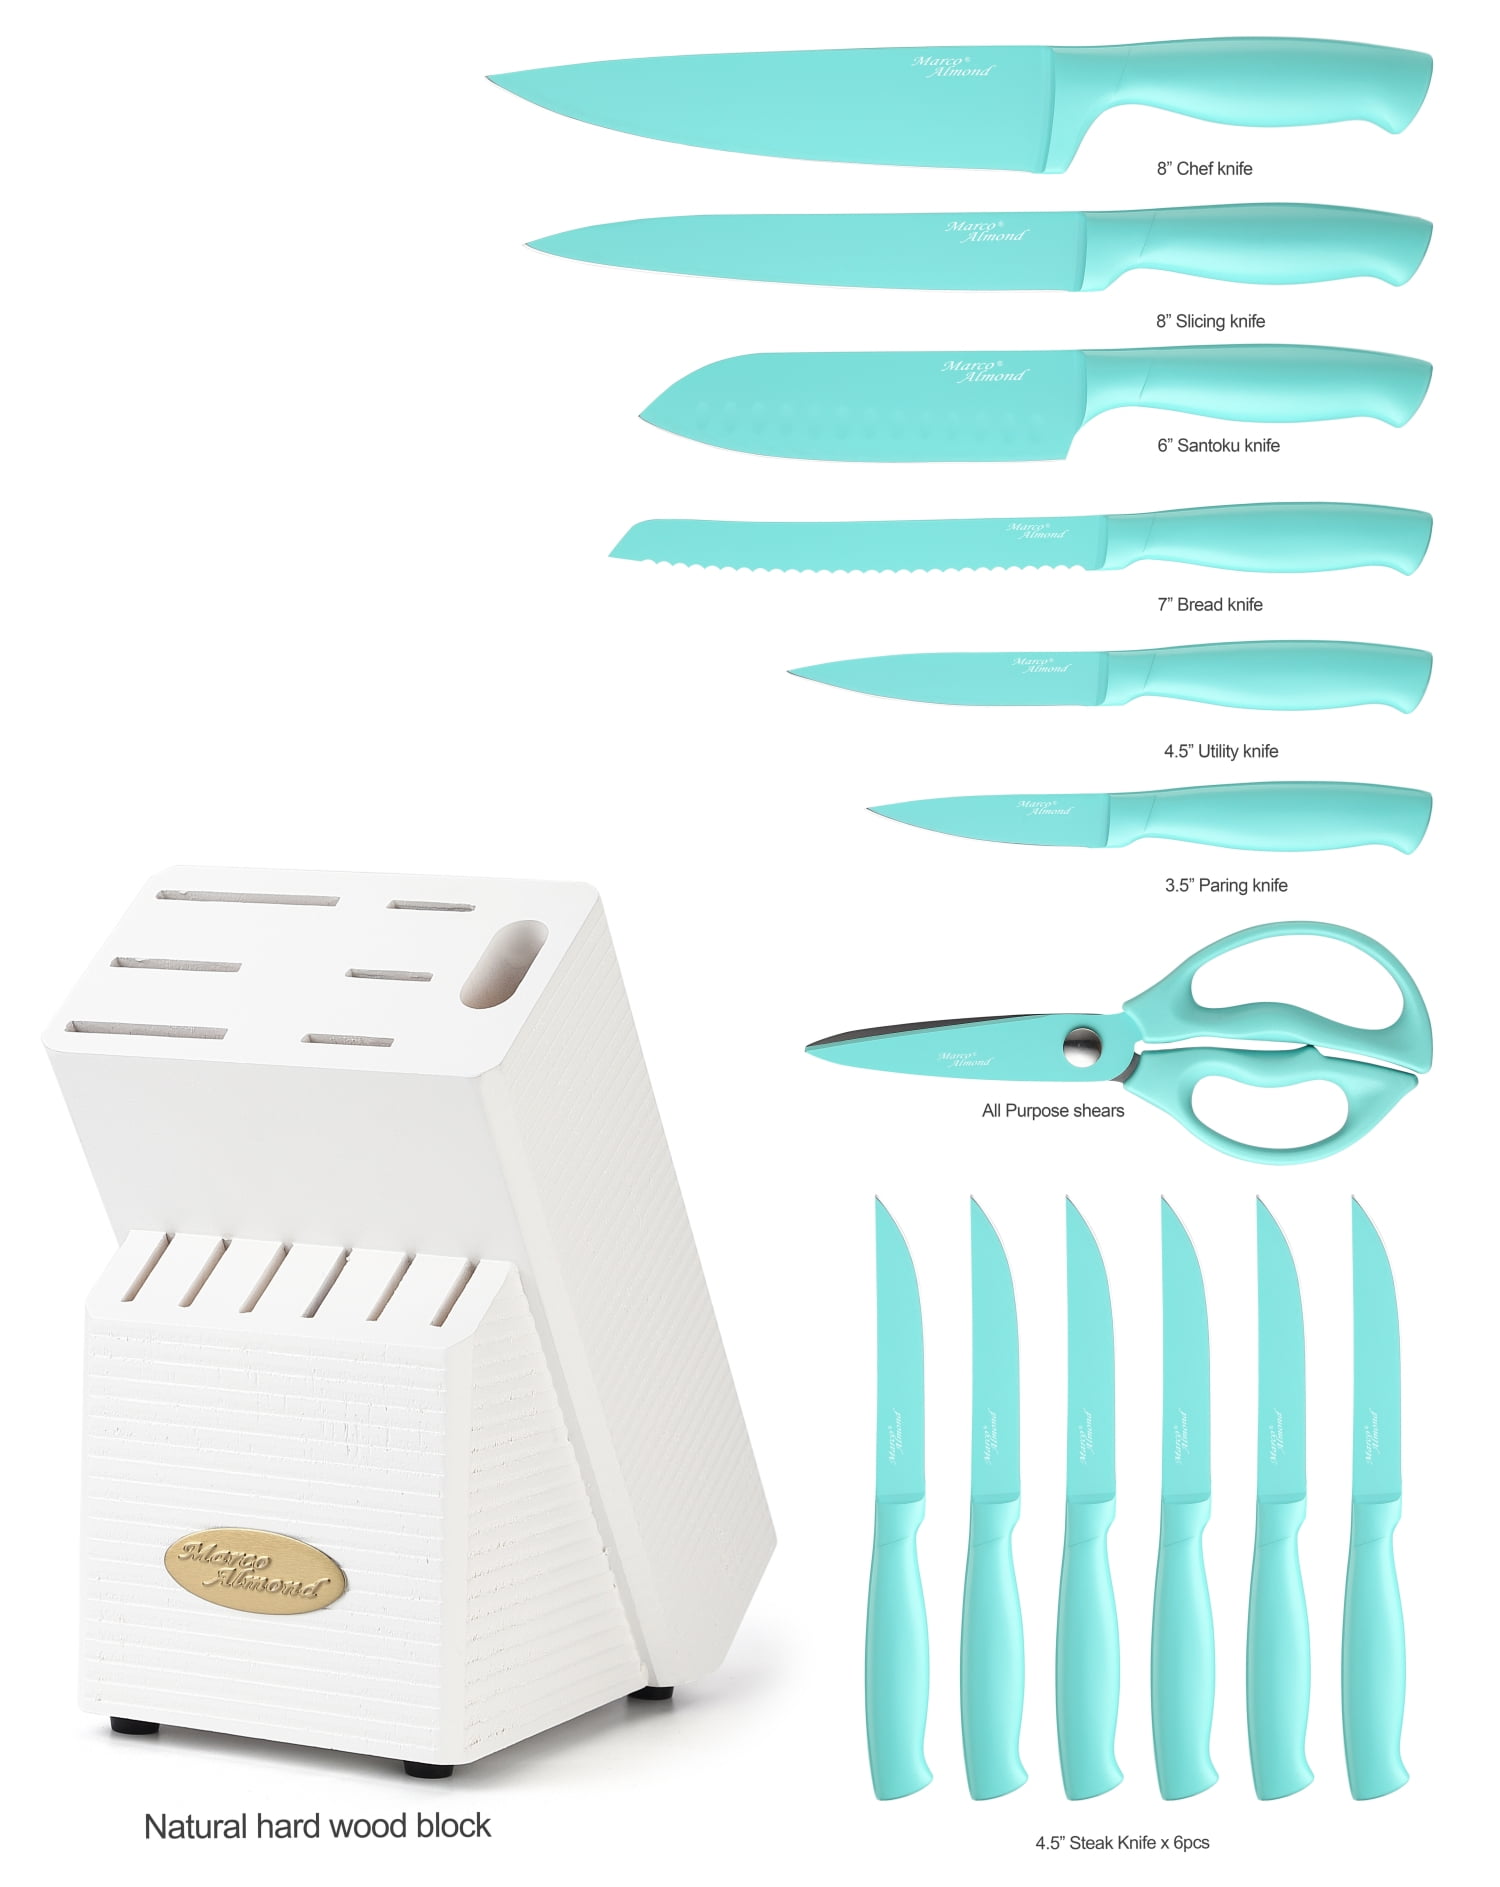 Gold Knife Set - Marco Almond® Knife Block Set MA21,Titanium Coated 14  Pieces Stainless Steel Chef Gold Kitchen Knife Sets with White Block